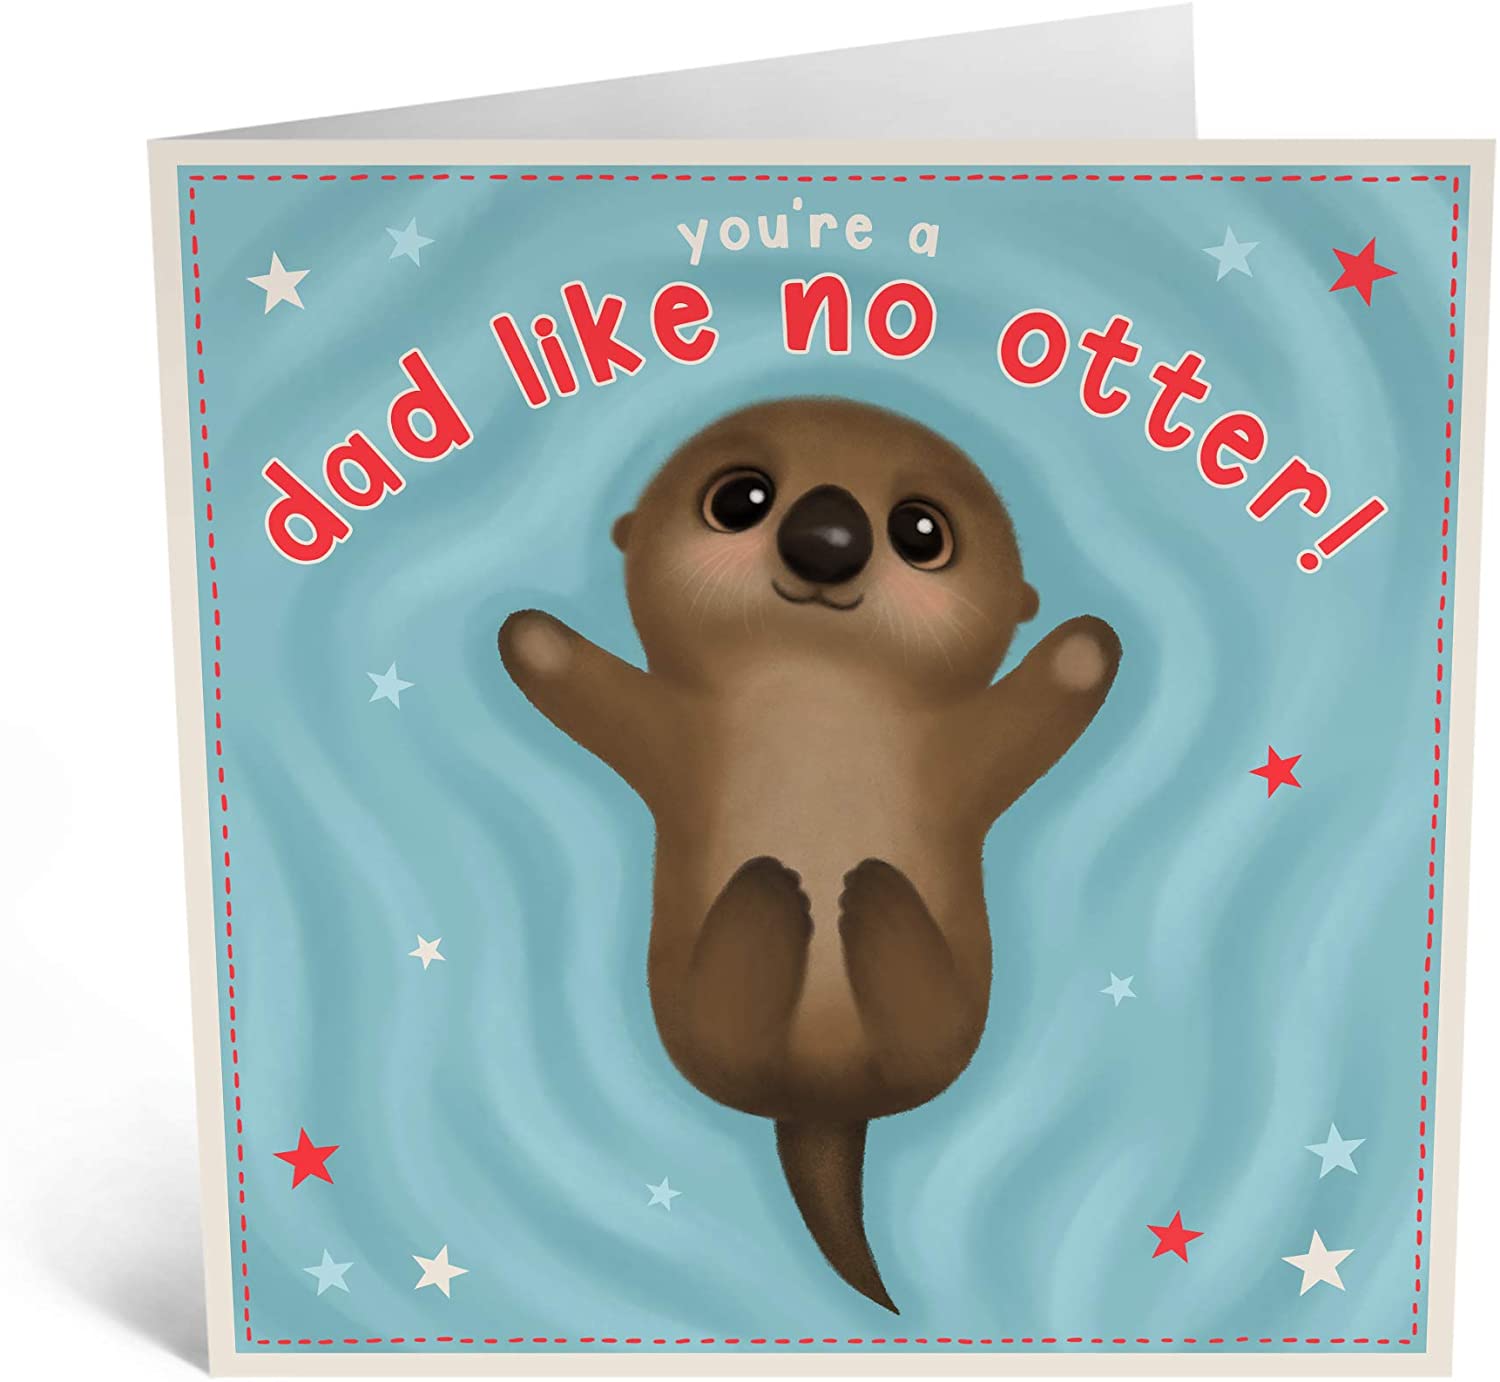 Central 23 - Cute Birthday Cards for Dad - 'Dad Like No Otter' - Sweet Birthday Card for Dad - Dad Birthday Card - Happy Birthday Dad - Adorable Greeting Cards - Comes with Cute Stickers